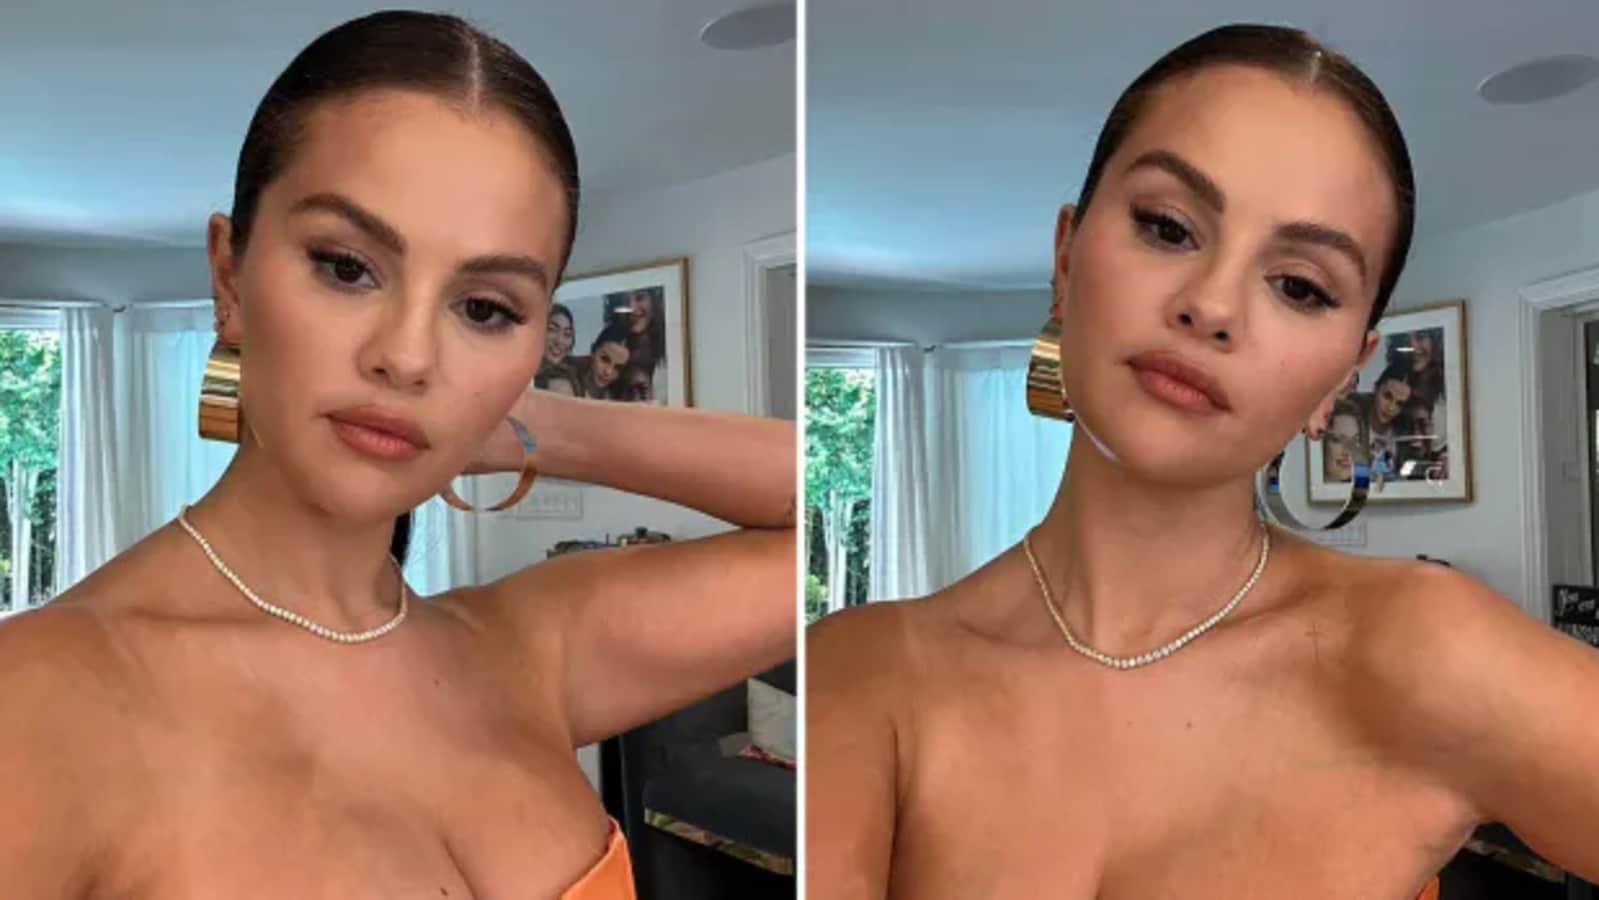 aaron d reed recommends selena gomez showing her tits pic